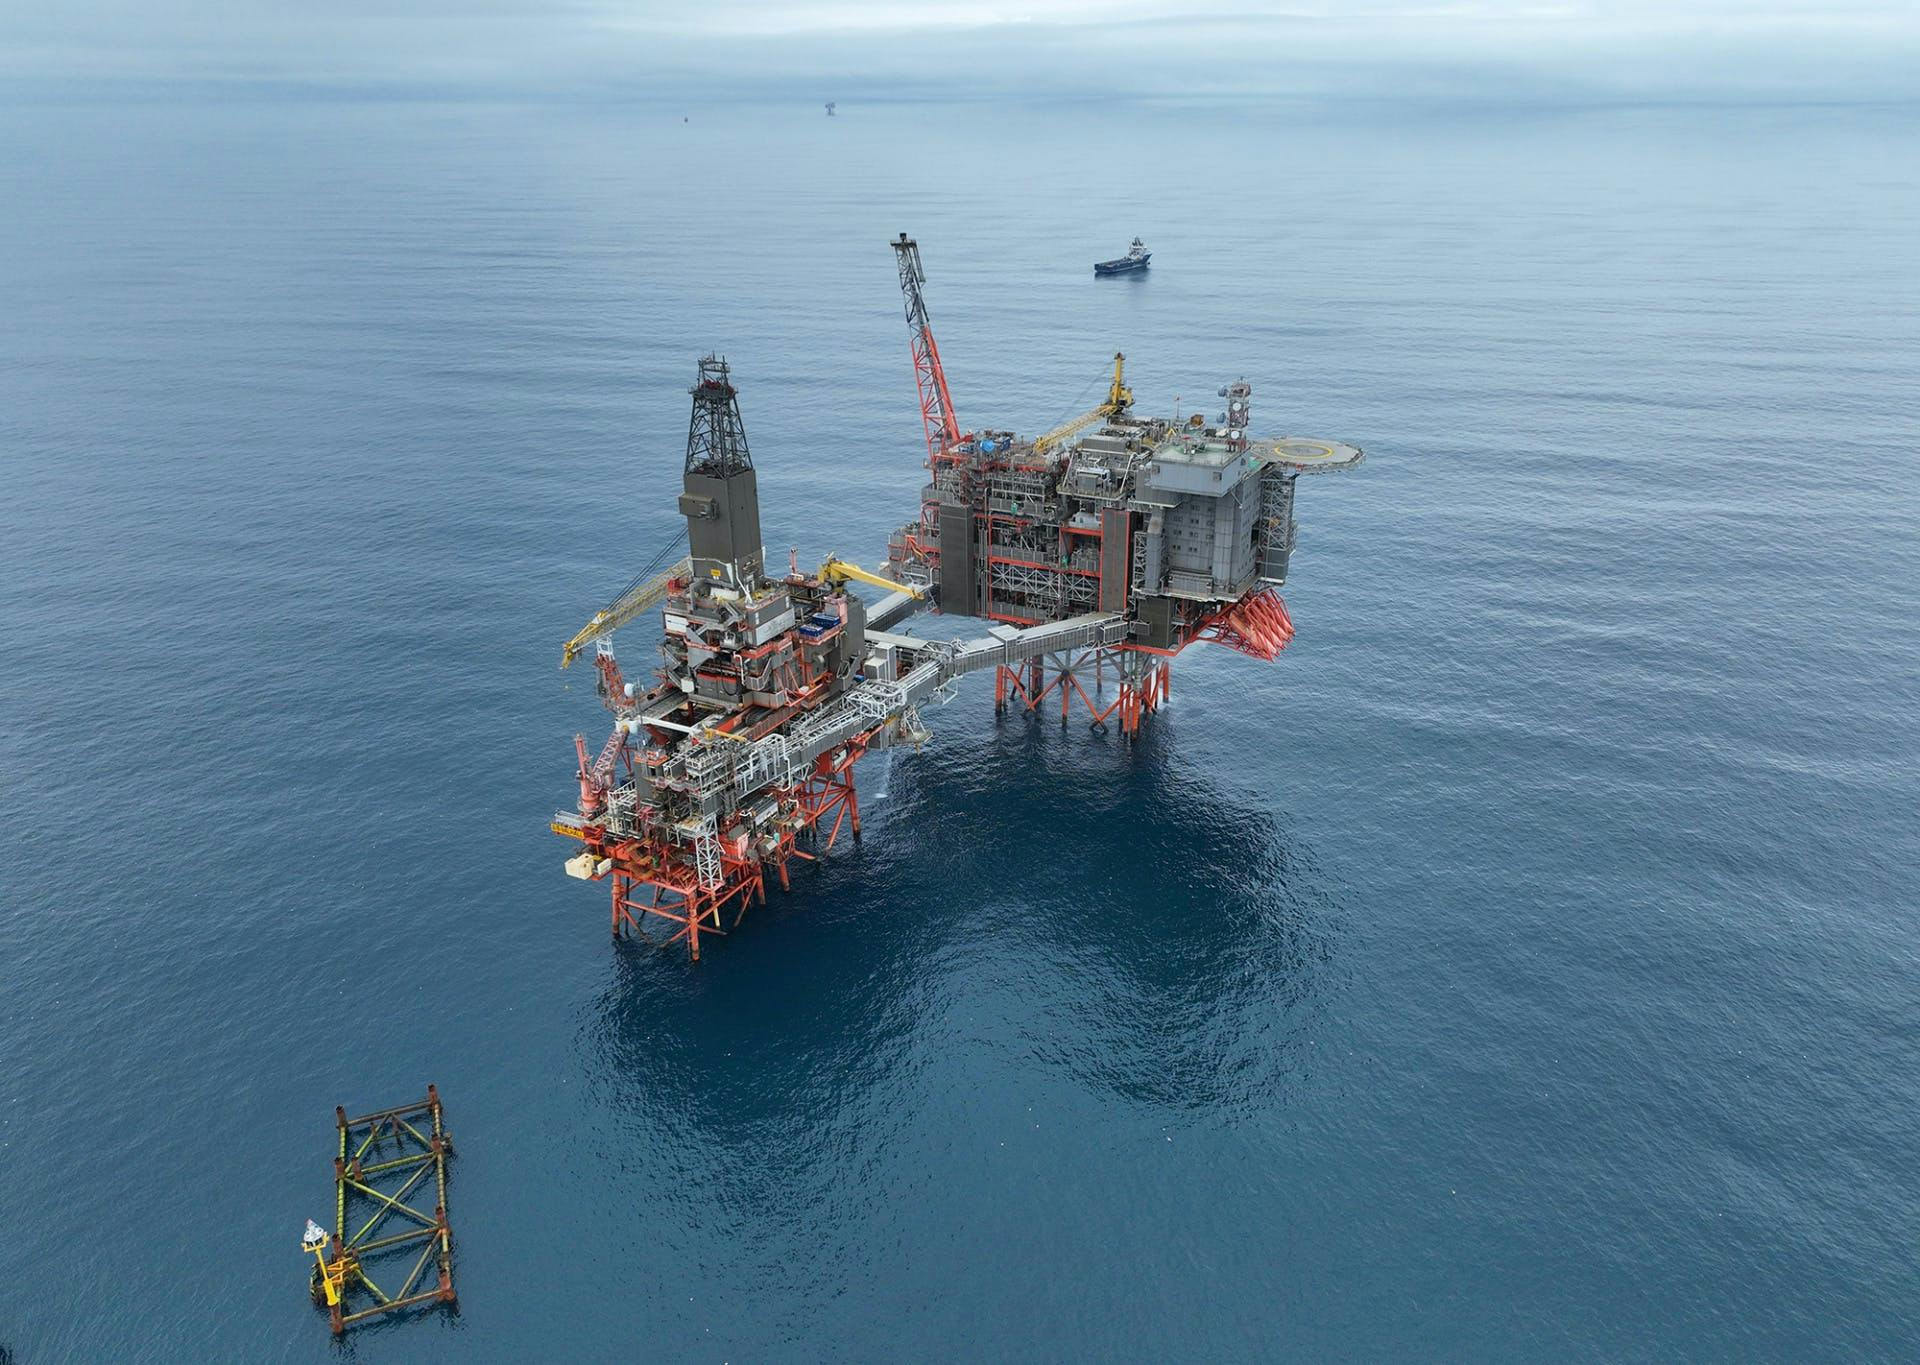 The Valhall Field is located in the southern part of the Norwegian sector in the North Sea.